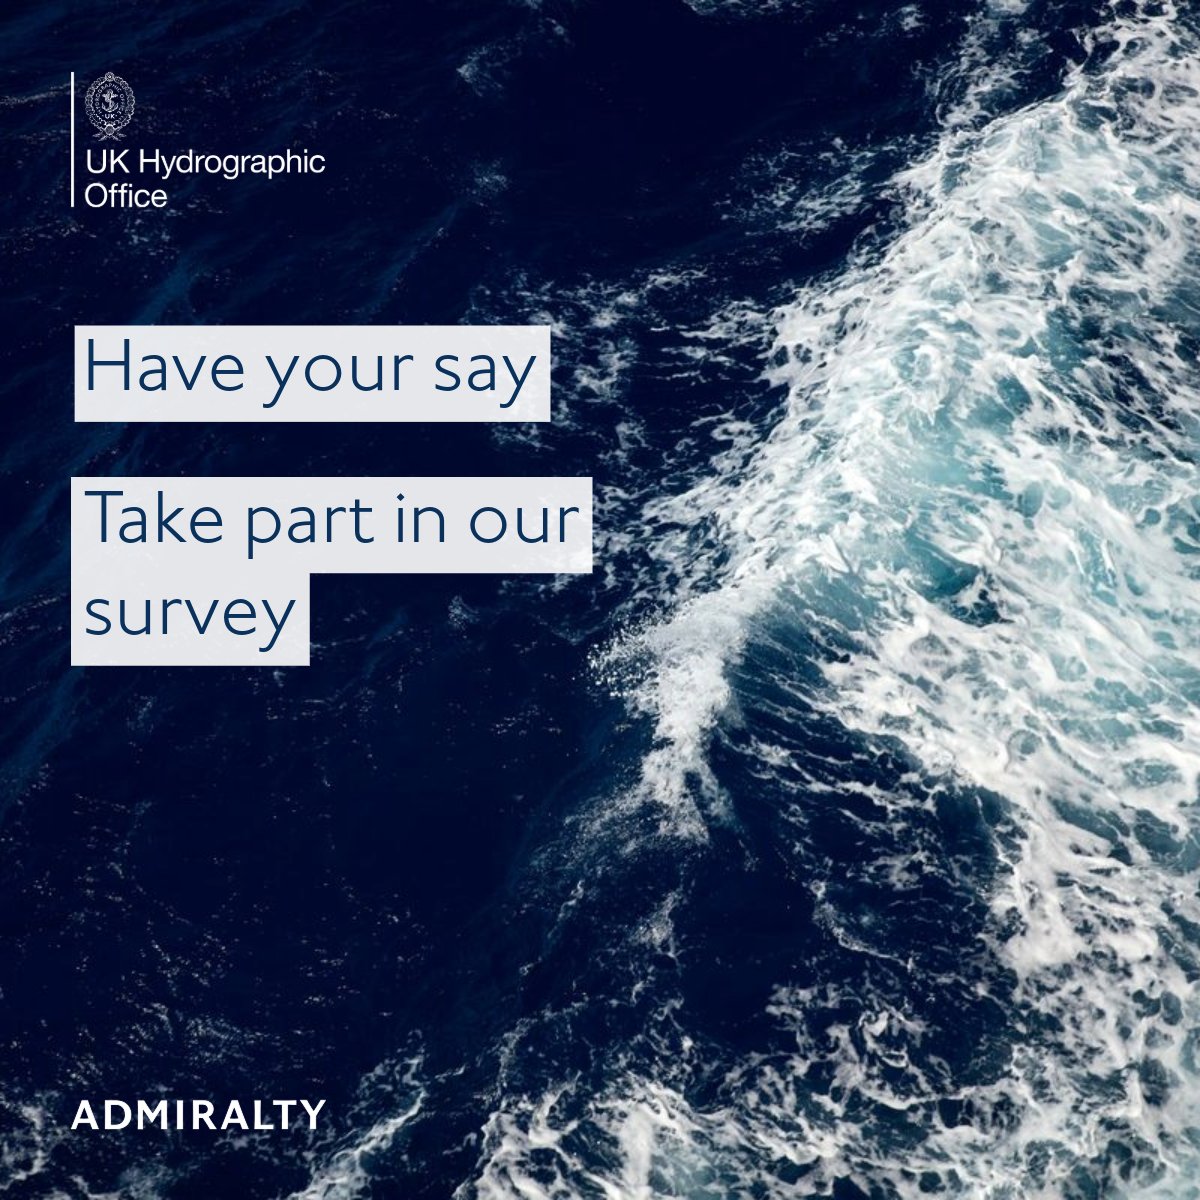 At the UKHO, we're keen to understand our customers' experiences and requirements. We're committed to improving our work by understanding what matters most to you. We are grateful for your feedback. Please take part in our short survey: ow.ly/2ec050QJrXB